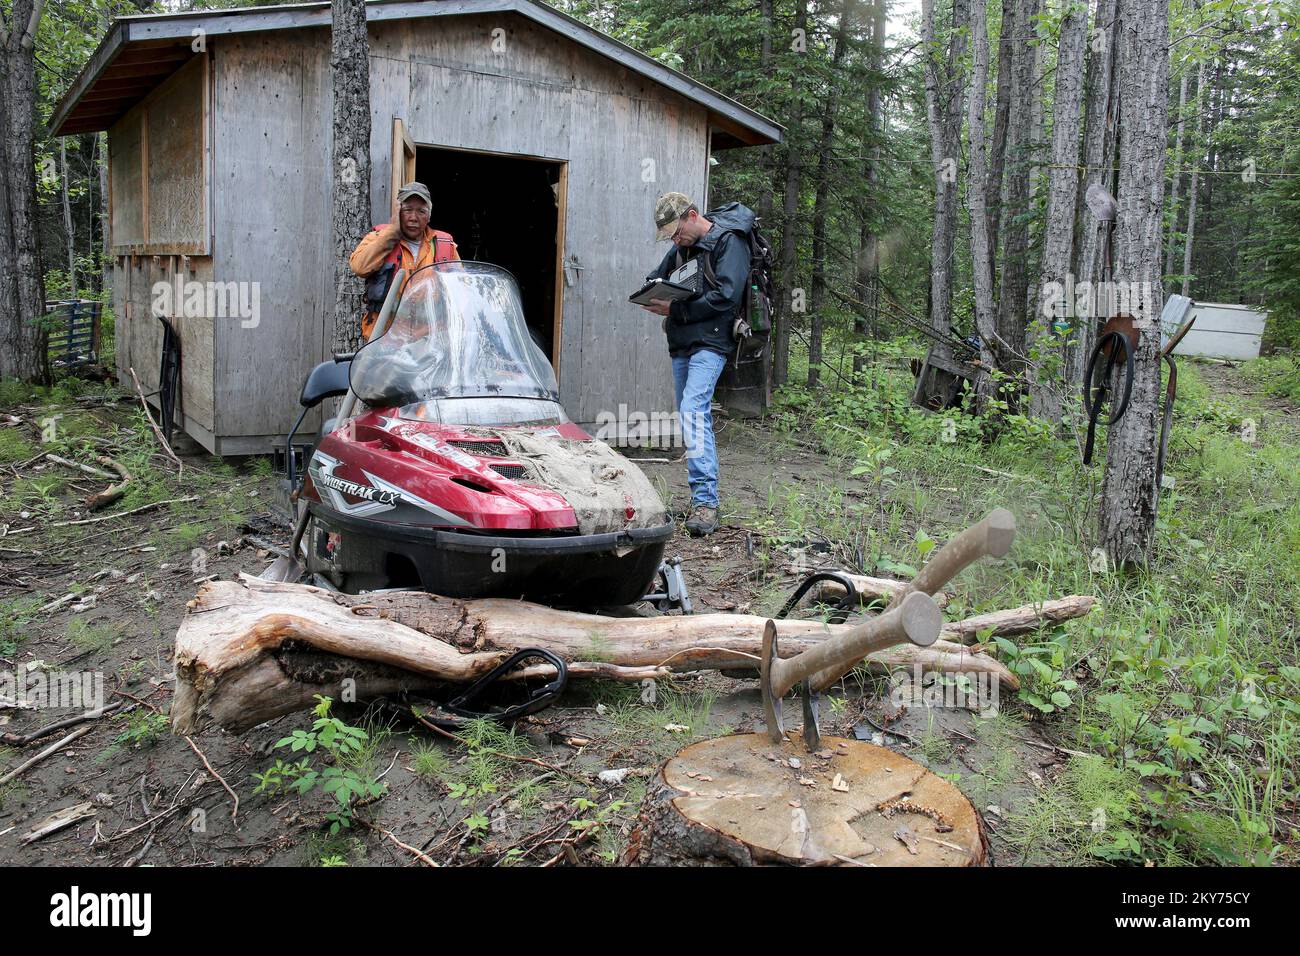 Hughes, Alaska, July 8, 2013   FEMA inspector Marty Williams is working with disaster survivor Ralph Williams in the remote areas of the Koyukuk River surveying the damages associated with severe flooding and ice jams that destroyed his personal property and home. Individuals and business owners who sustained losses in the designated area can begin applying for assistance by registering at www.disasterassistance.gov or by calling 1-800-621-FEMA (3362). Adam Dubrowa/ FEMA.. Photographs Relating to Disasters and Emergency Management Programs, Activities, and Officials Stock Photo